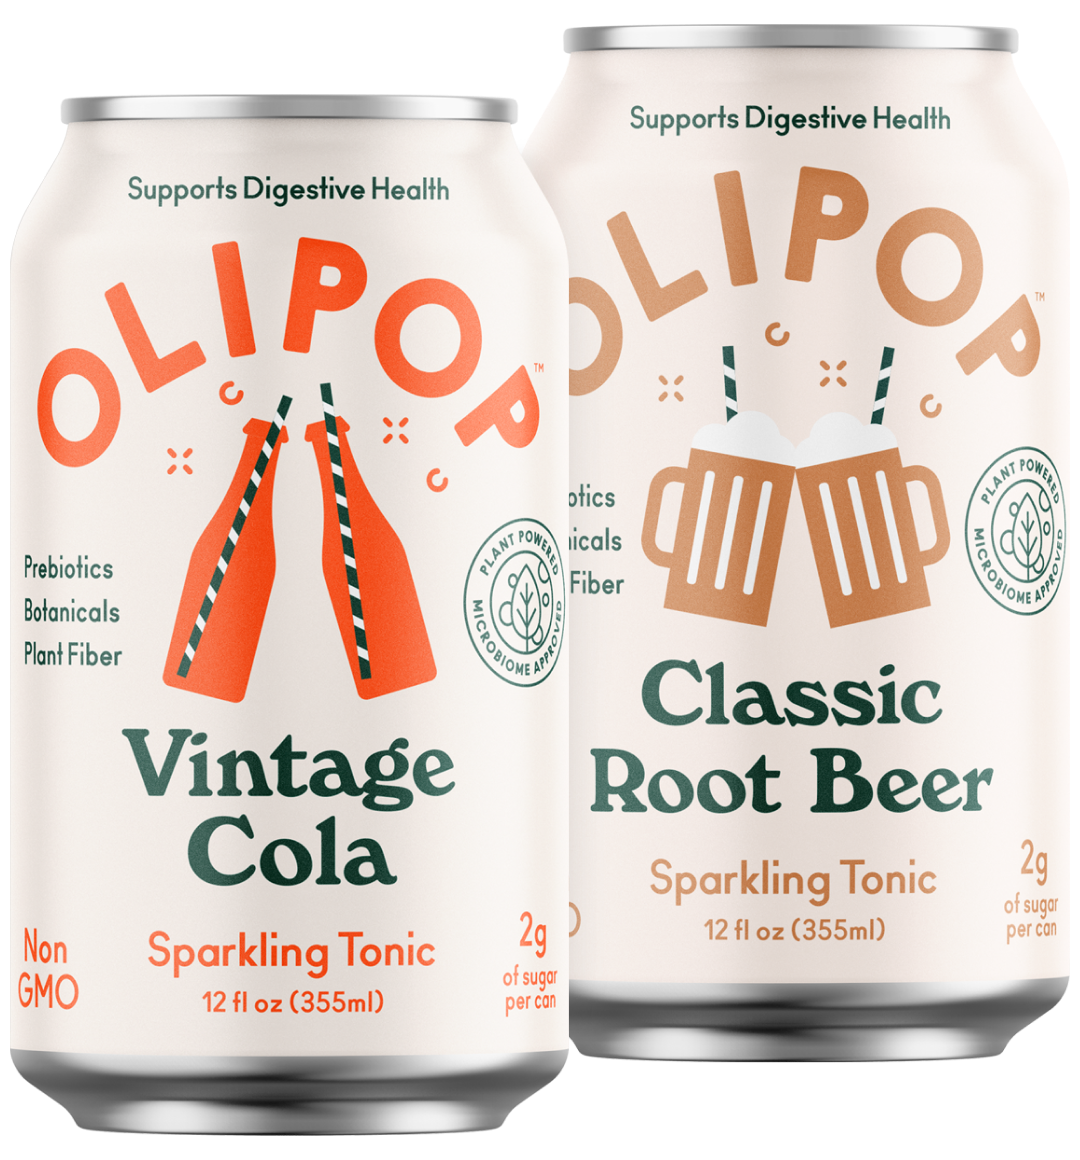 Can of Vintage Cola and Classic Root Beer OLIPOP